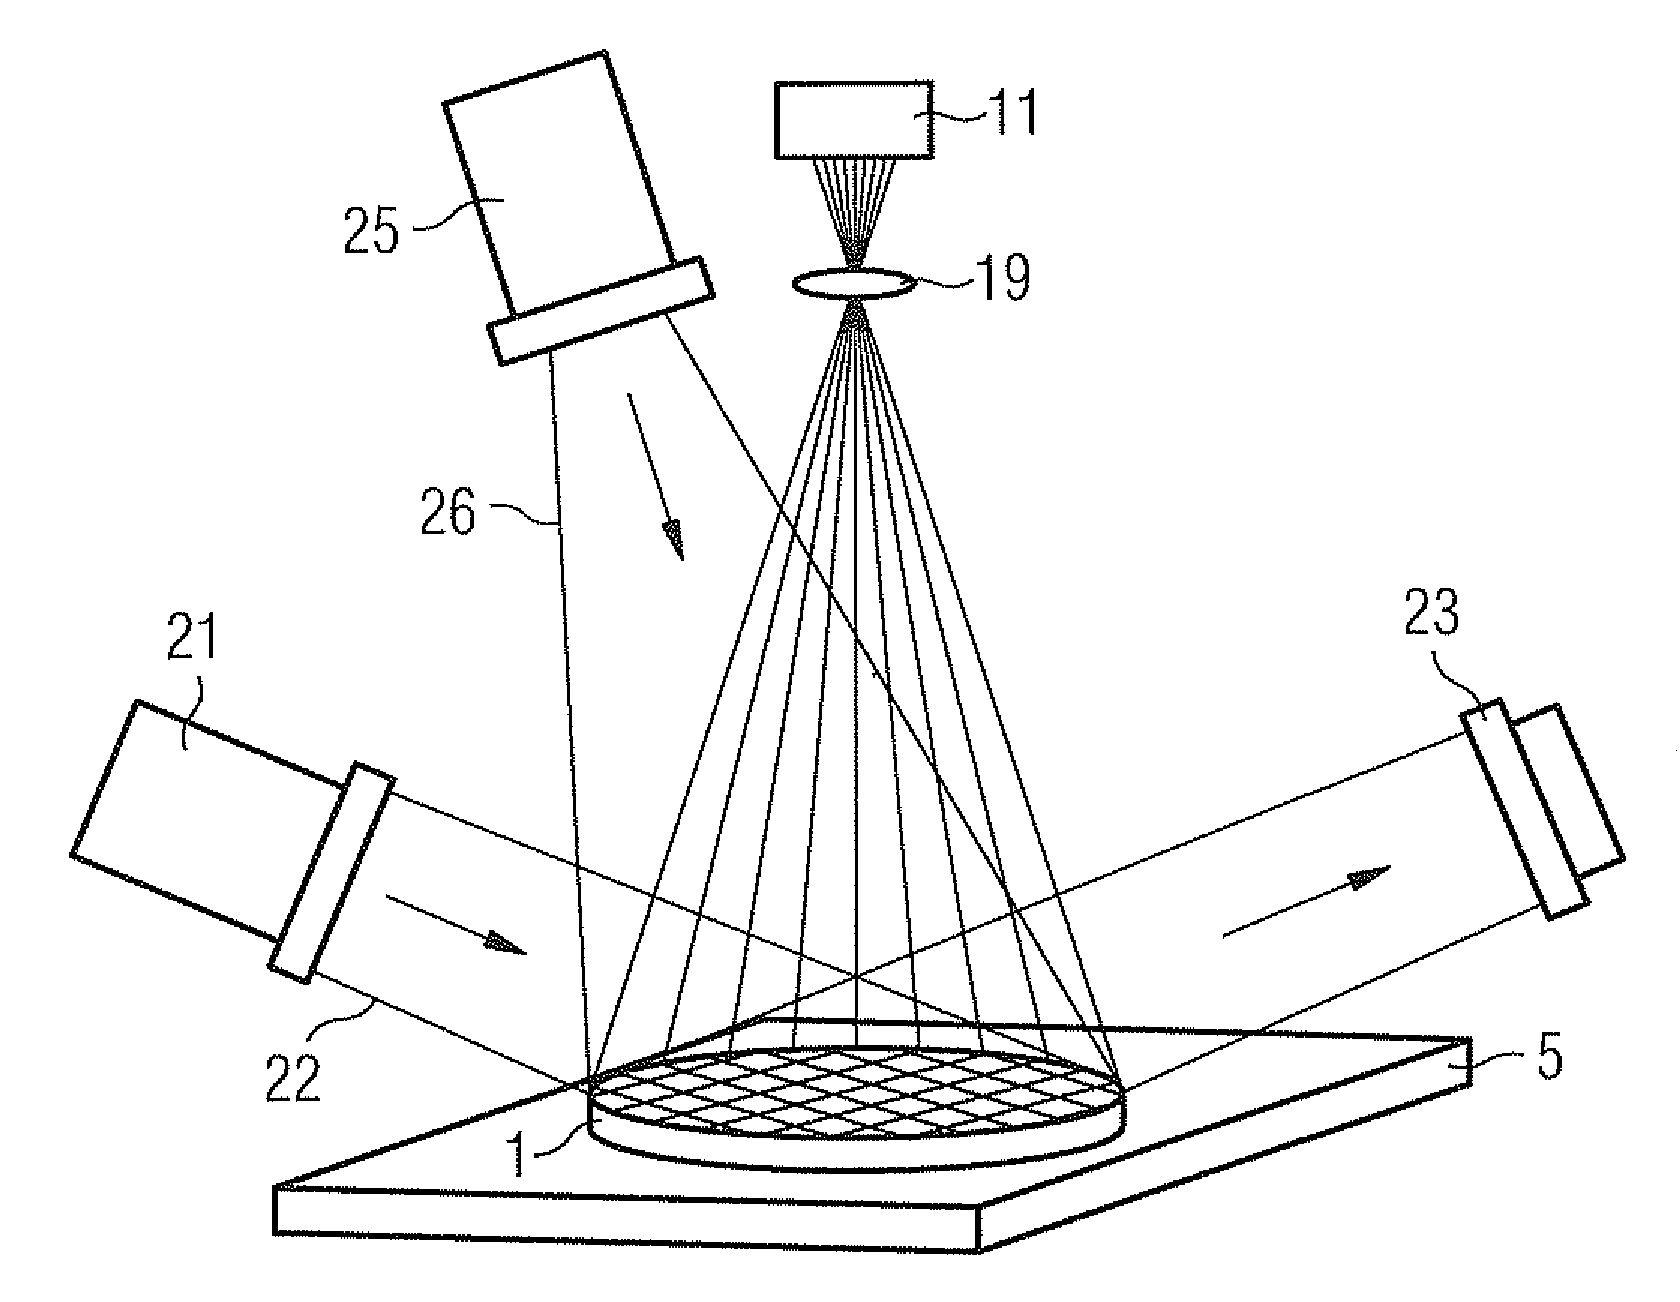 Optical inspection system and method